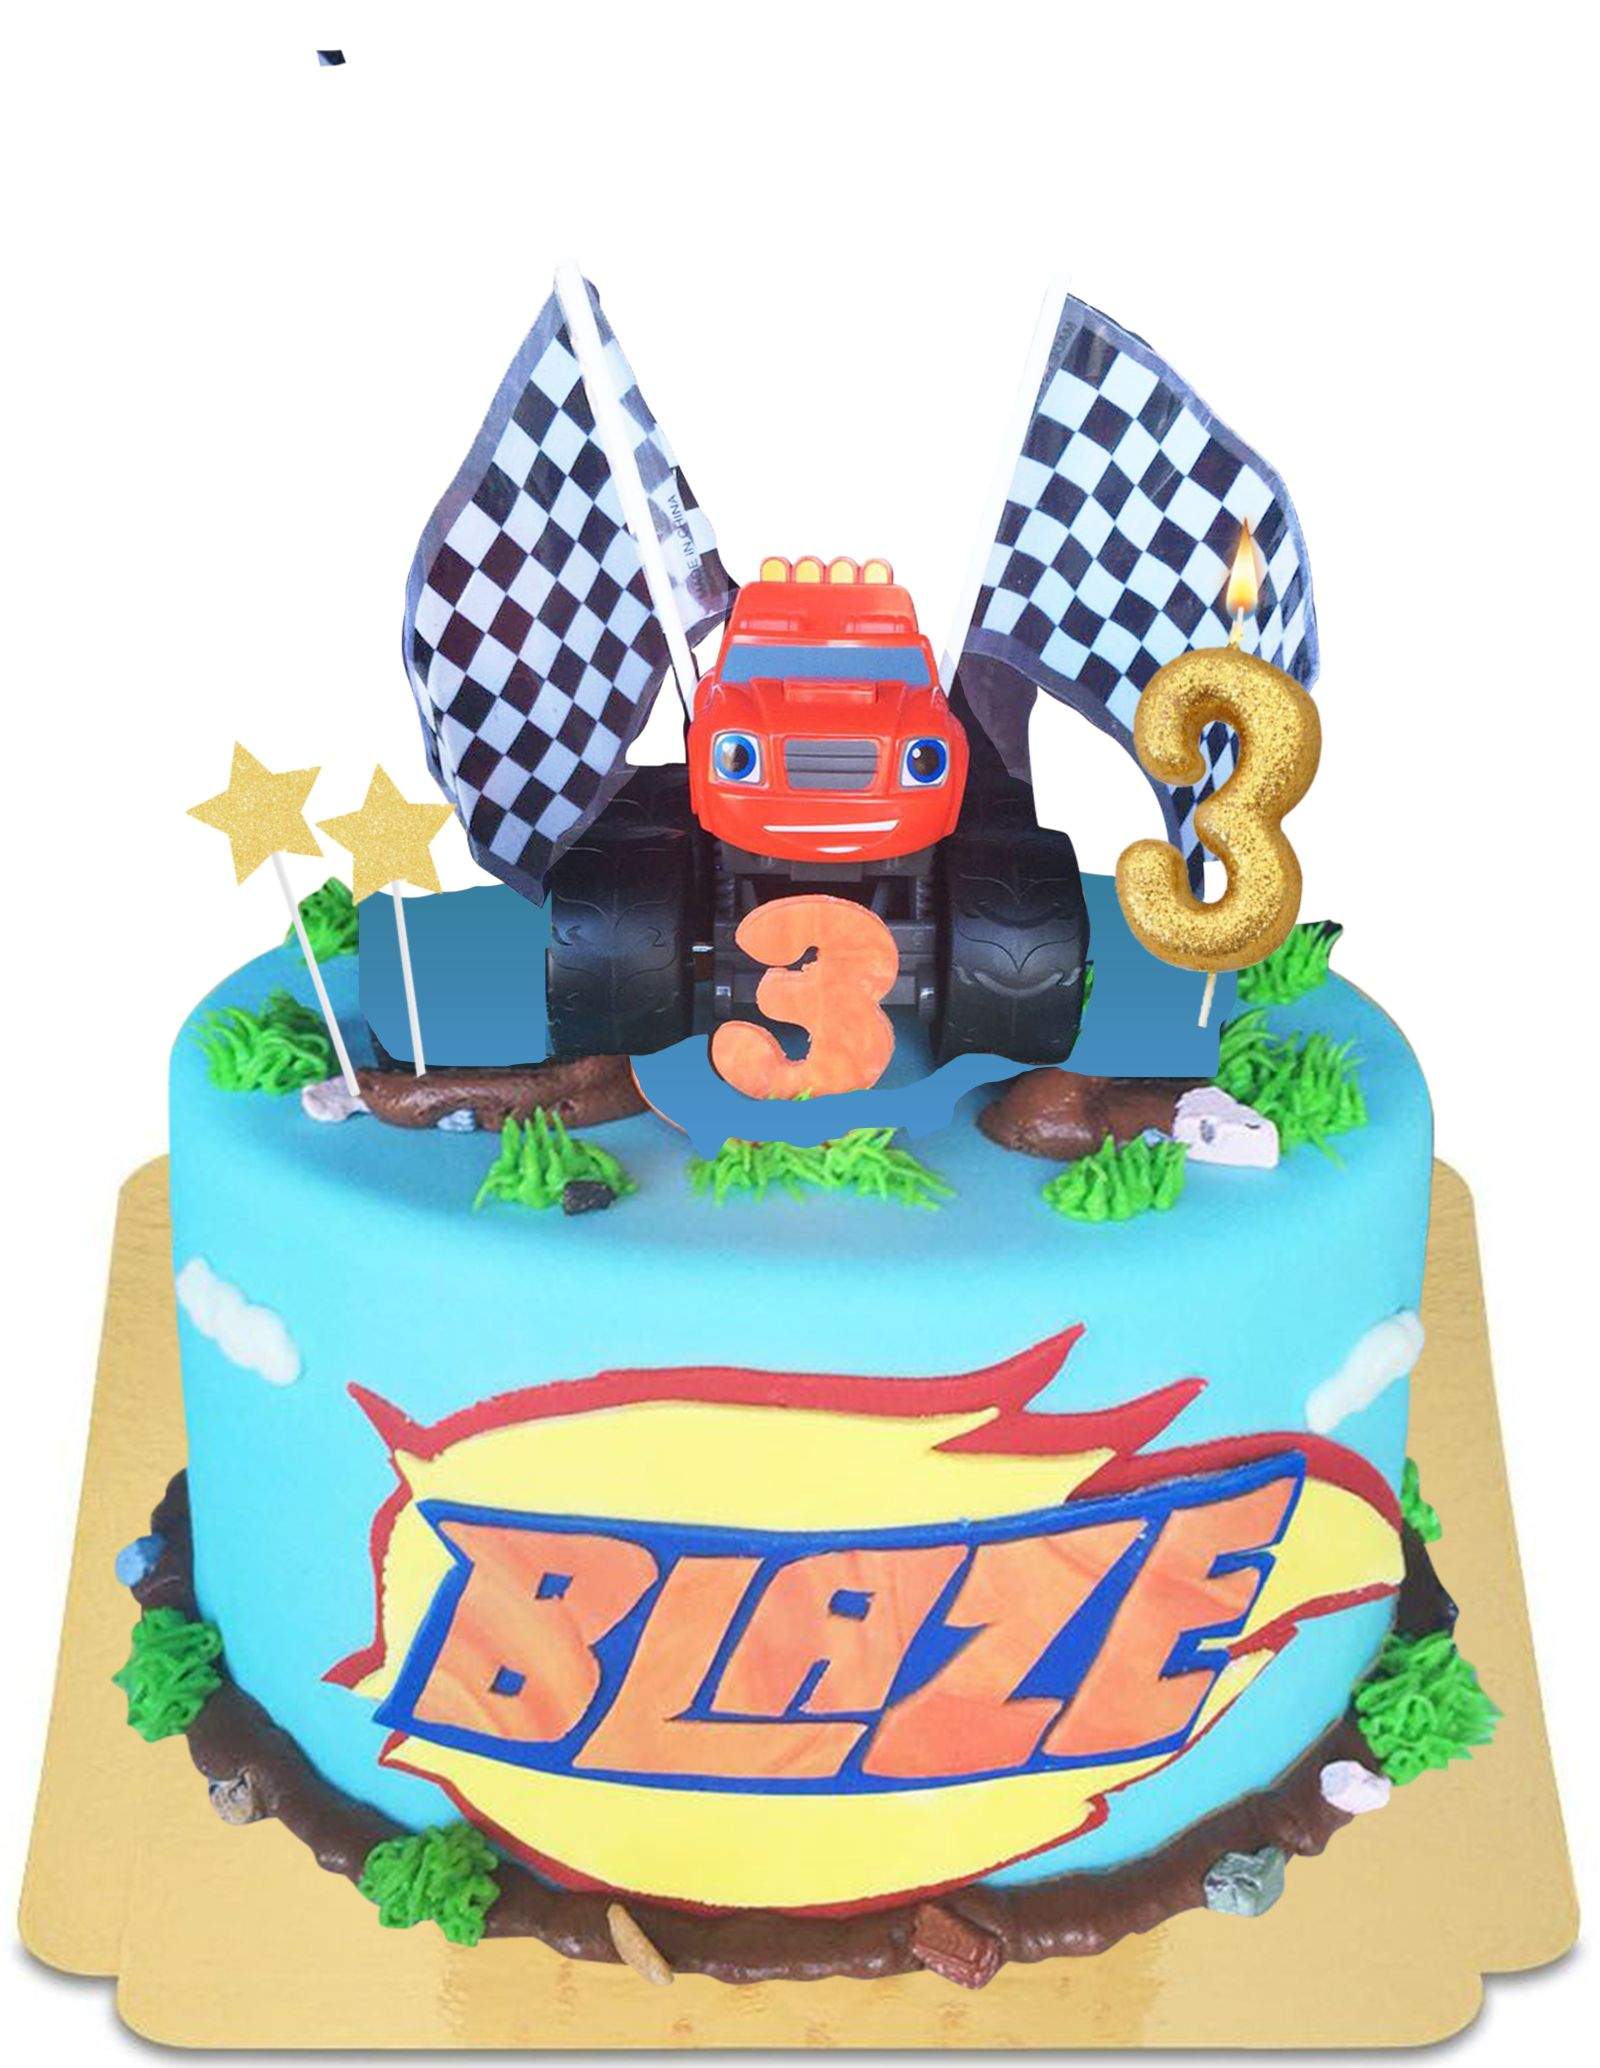 Blaze & Monster Machines Two~Tier Cake |Two Tier Cake|The Cake Store